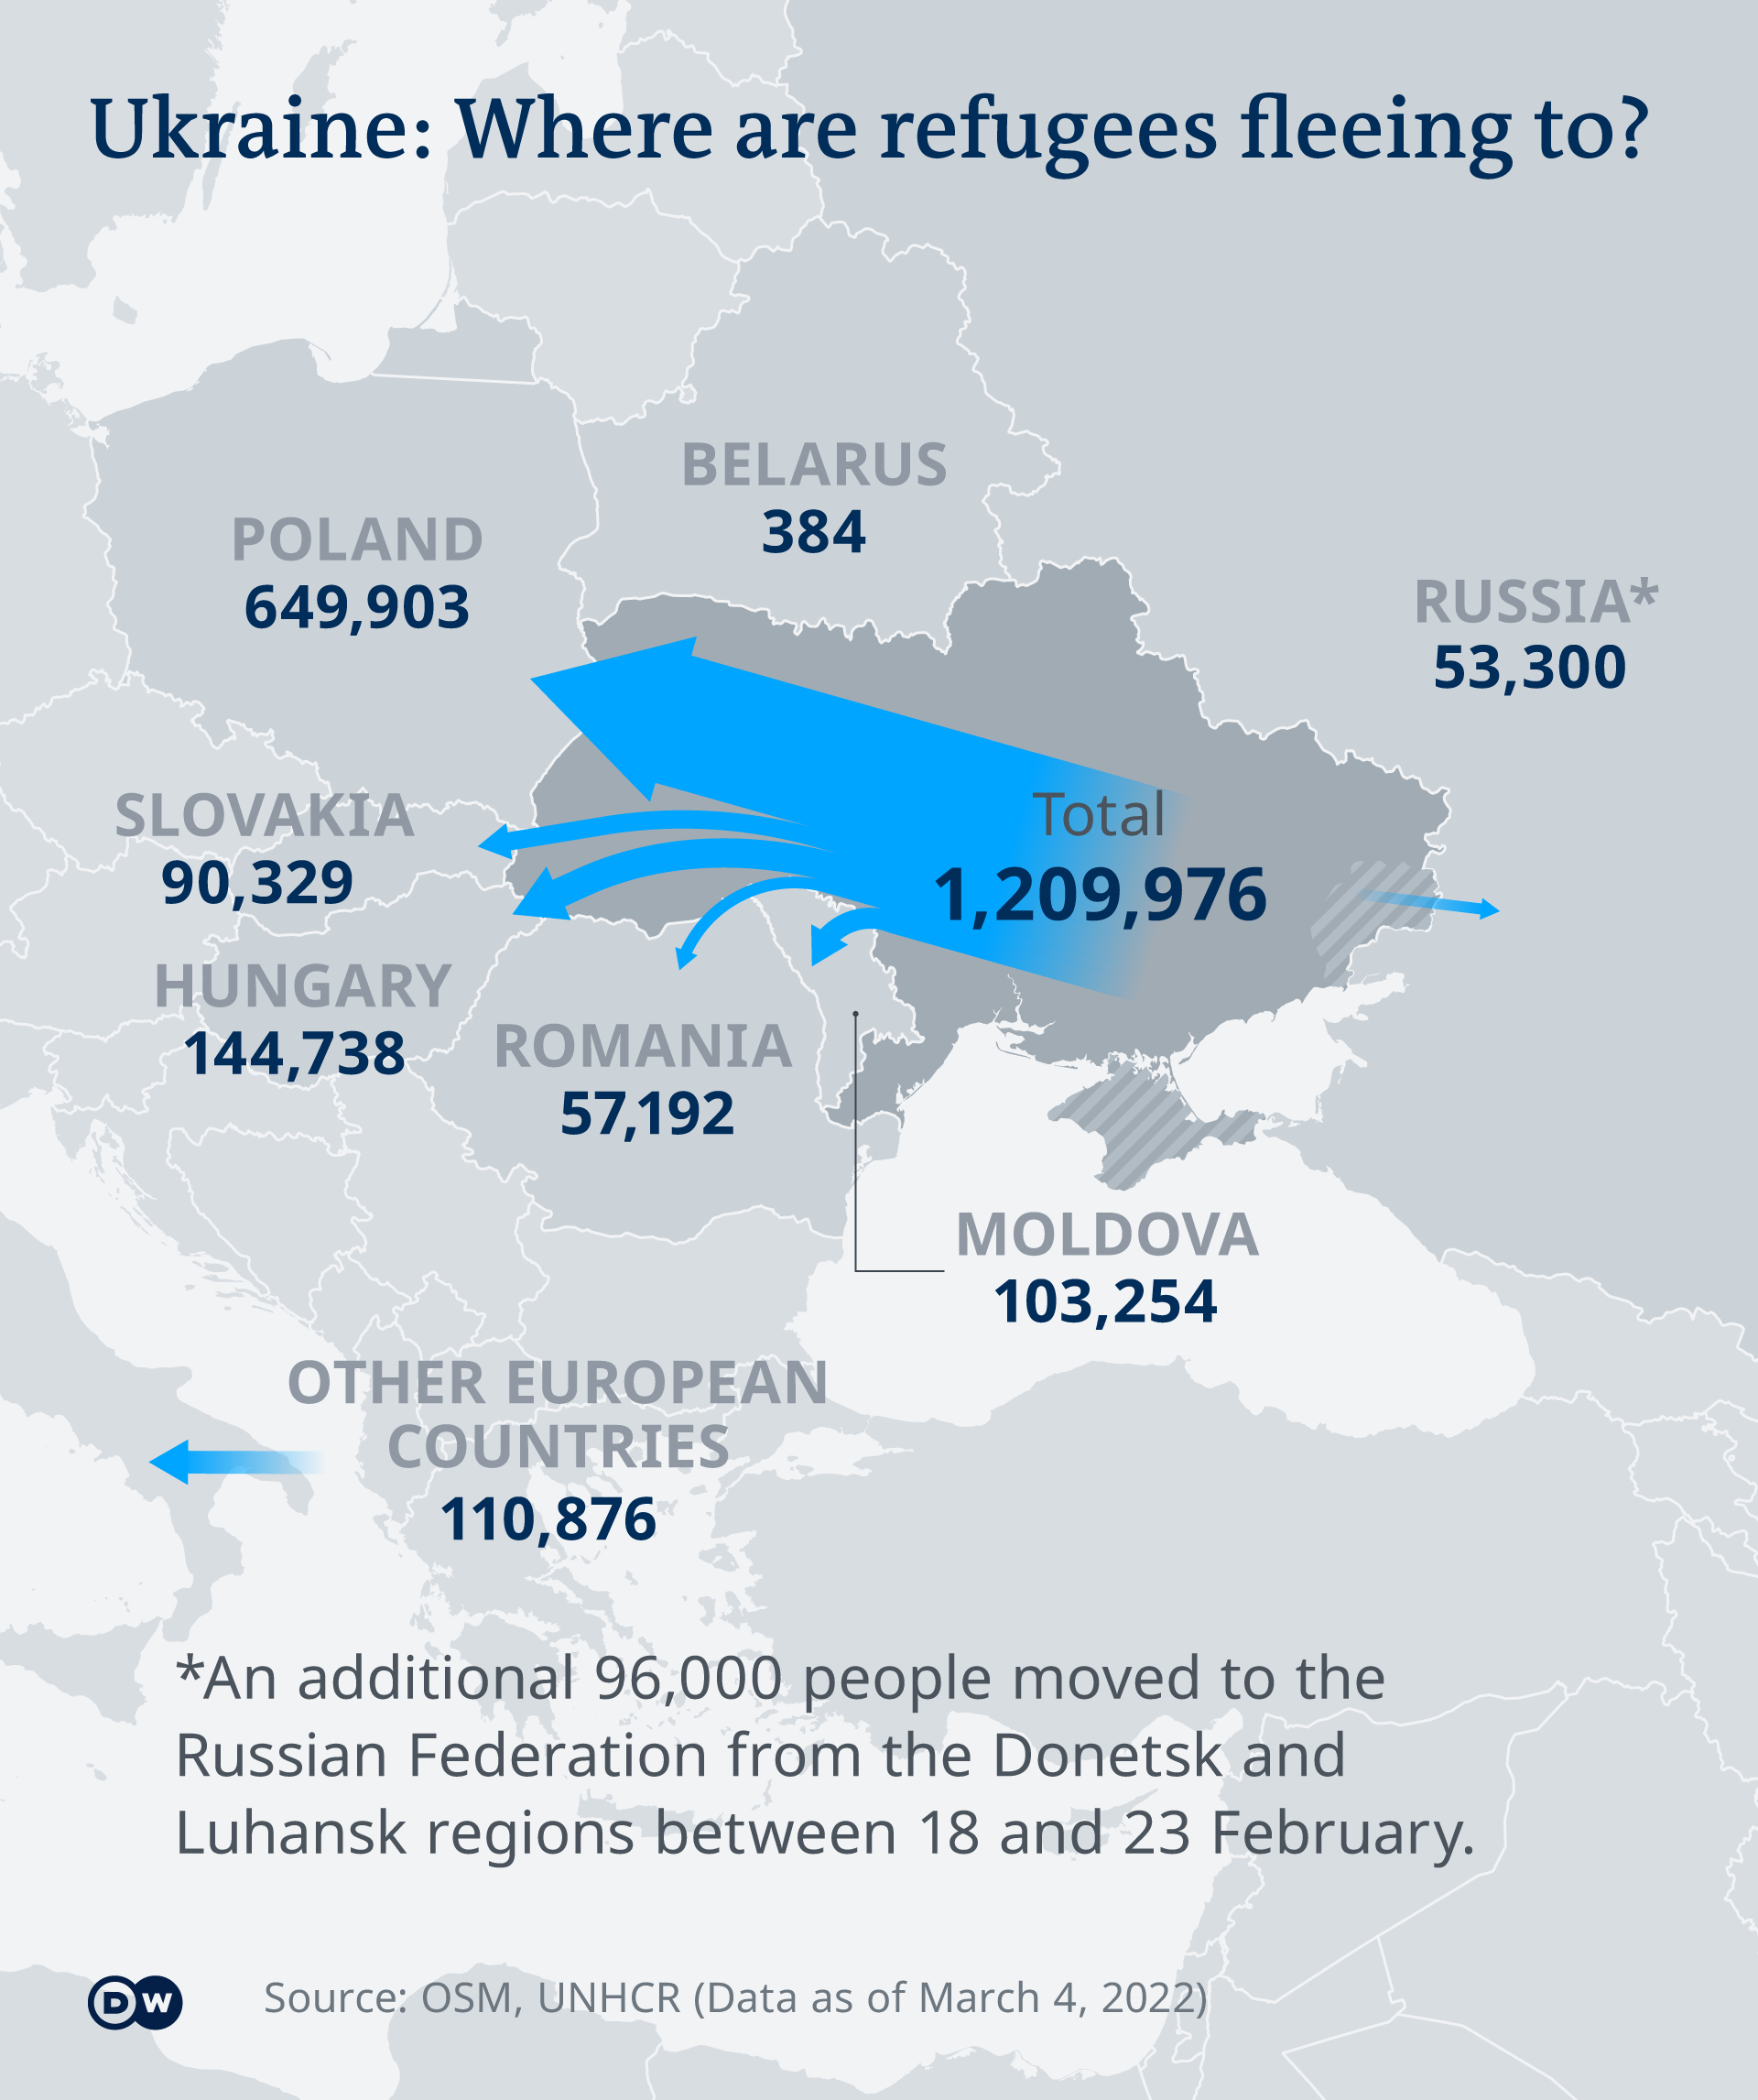 A map of Eastern Europe, showing where refugees from Ukraine have gone